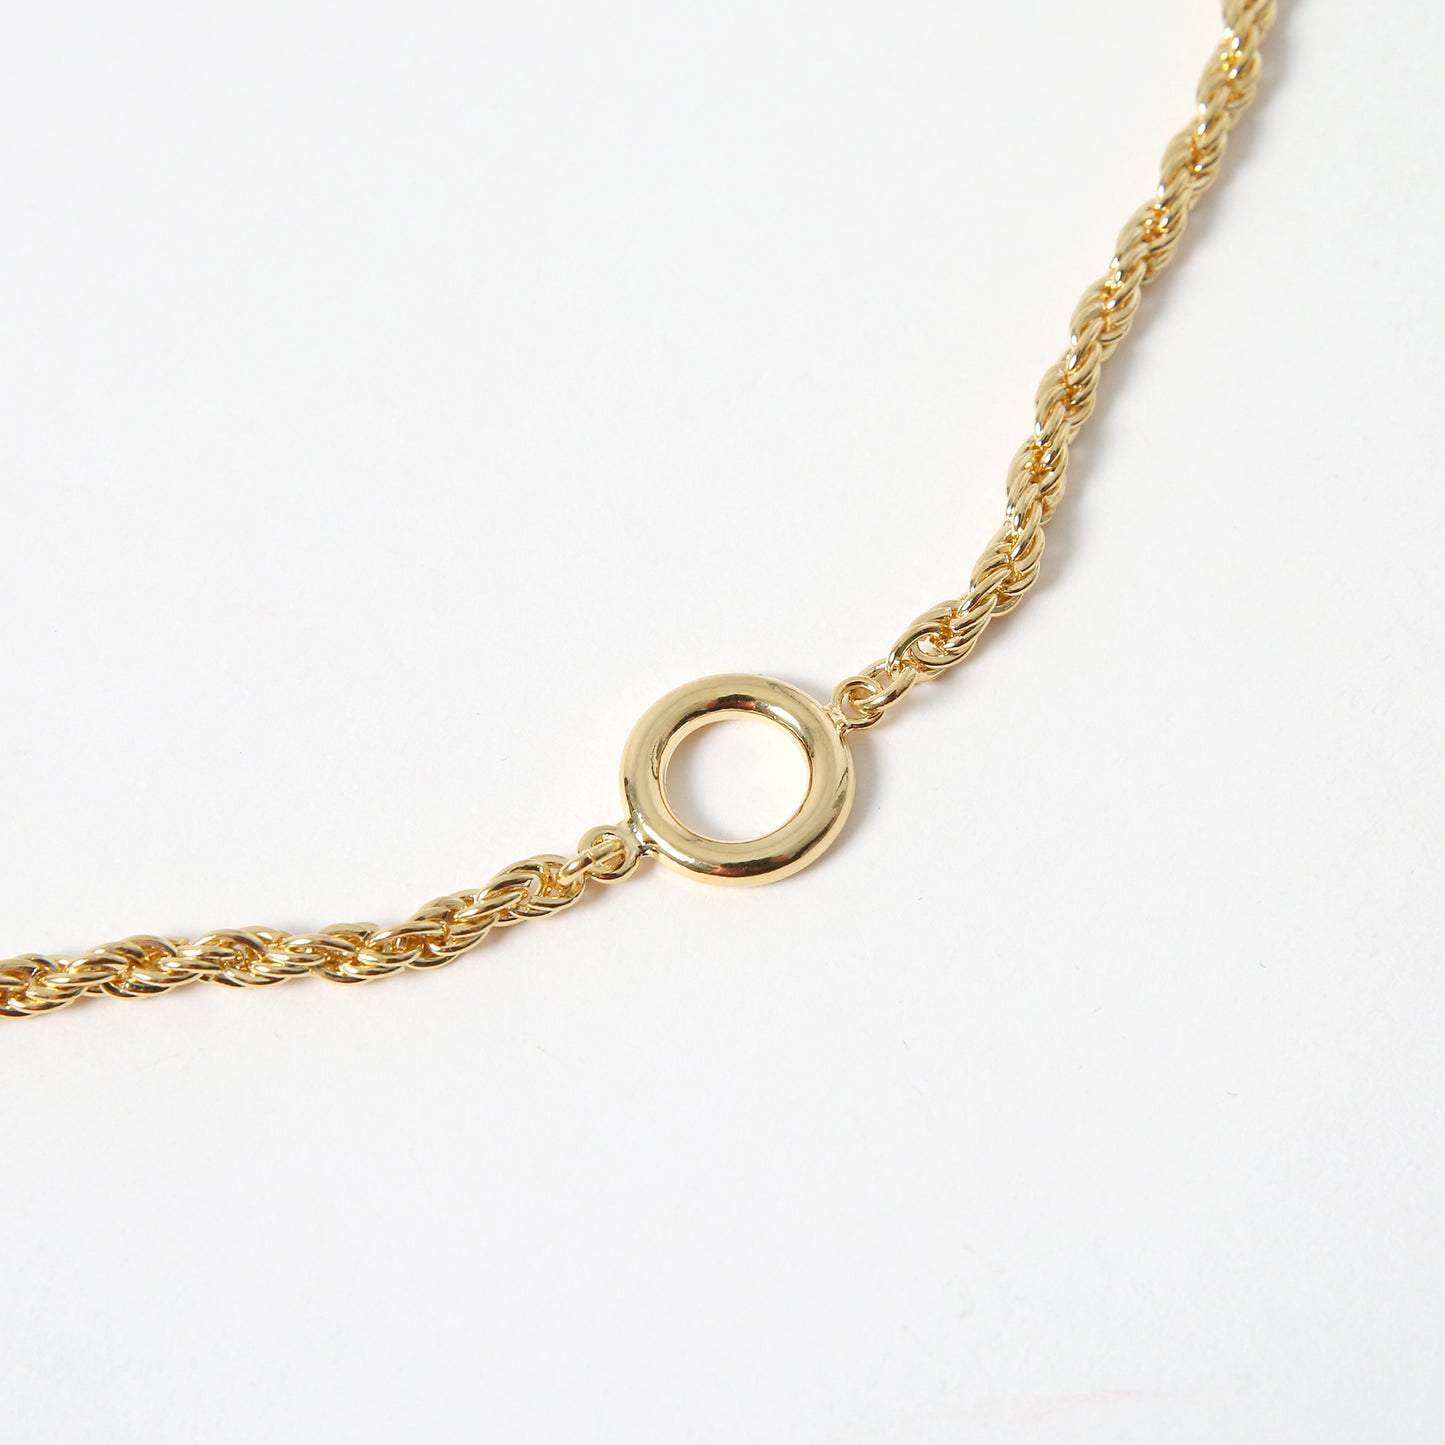 Mix Chain Necklace / ミックスチェーンネックレス